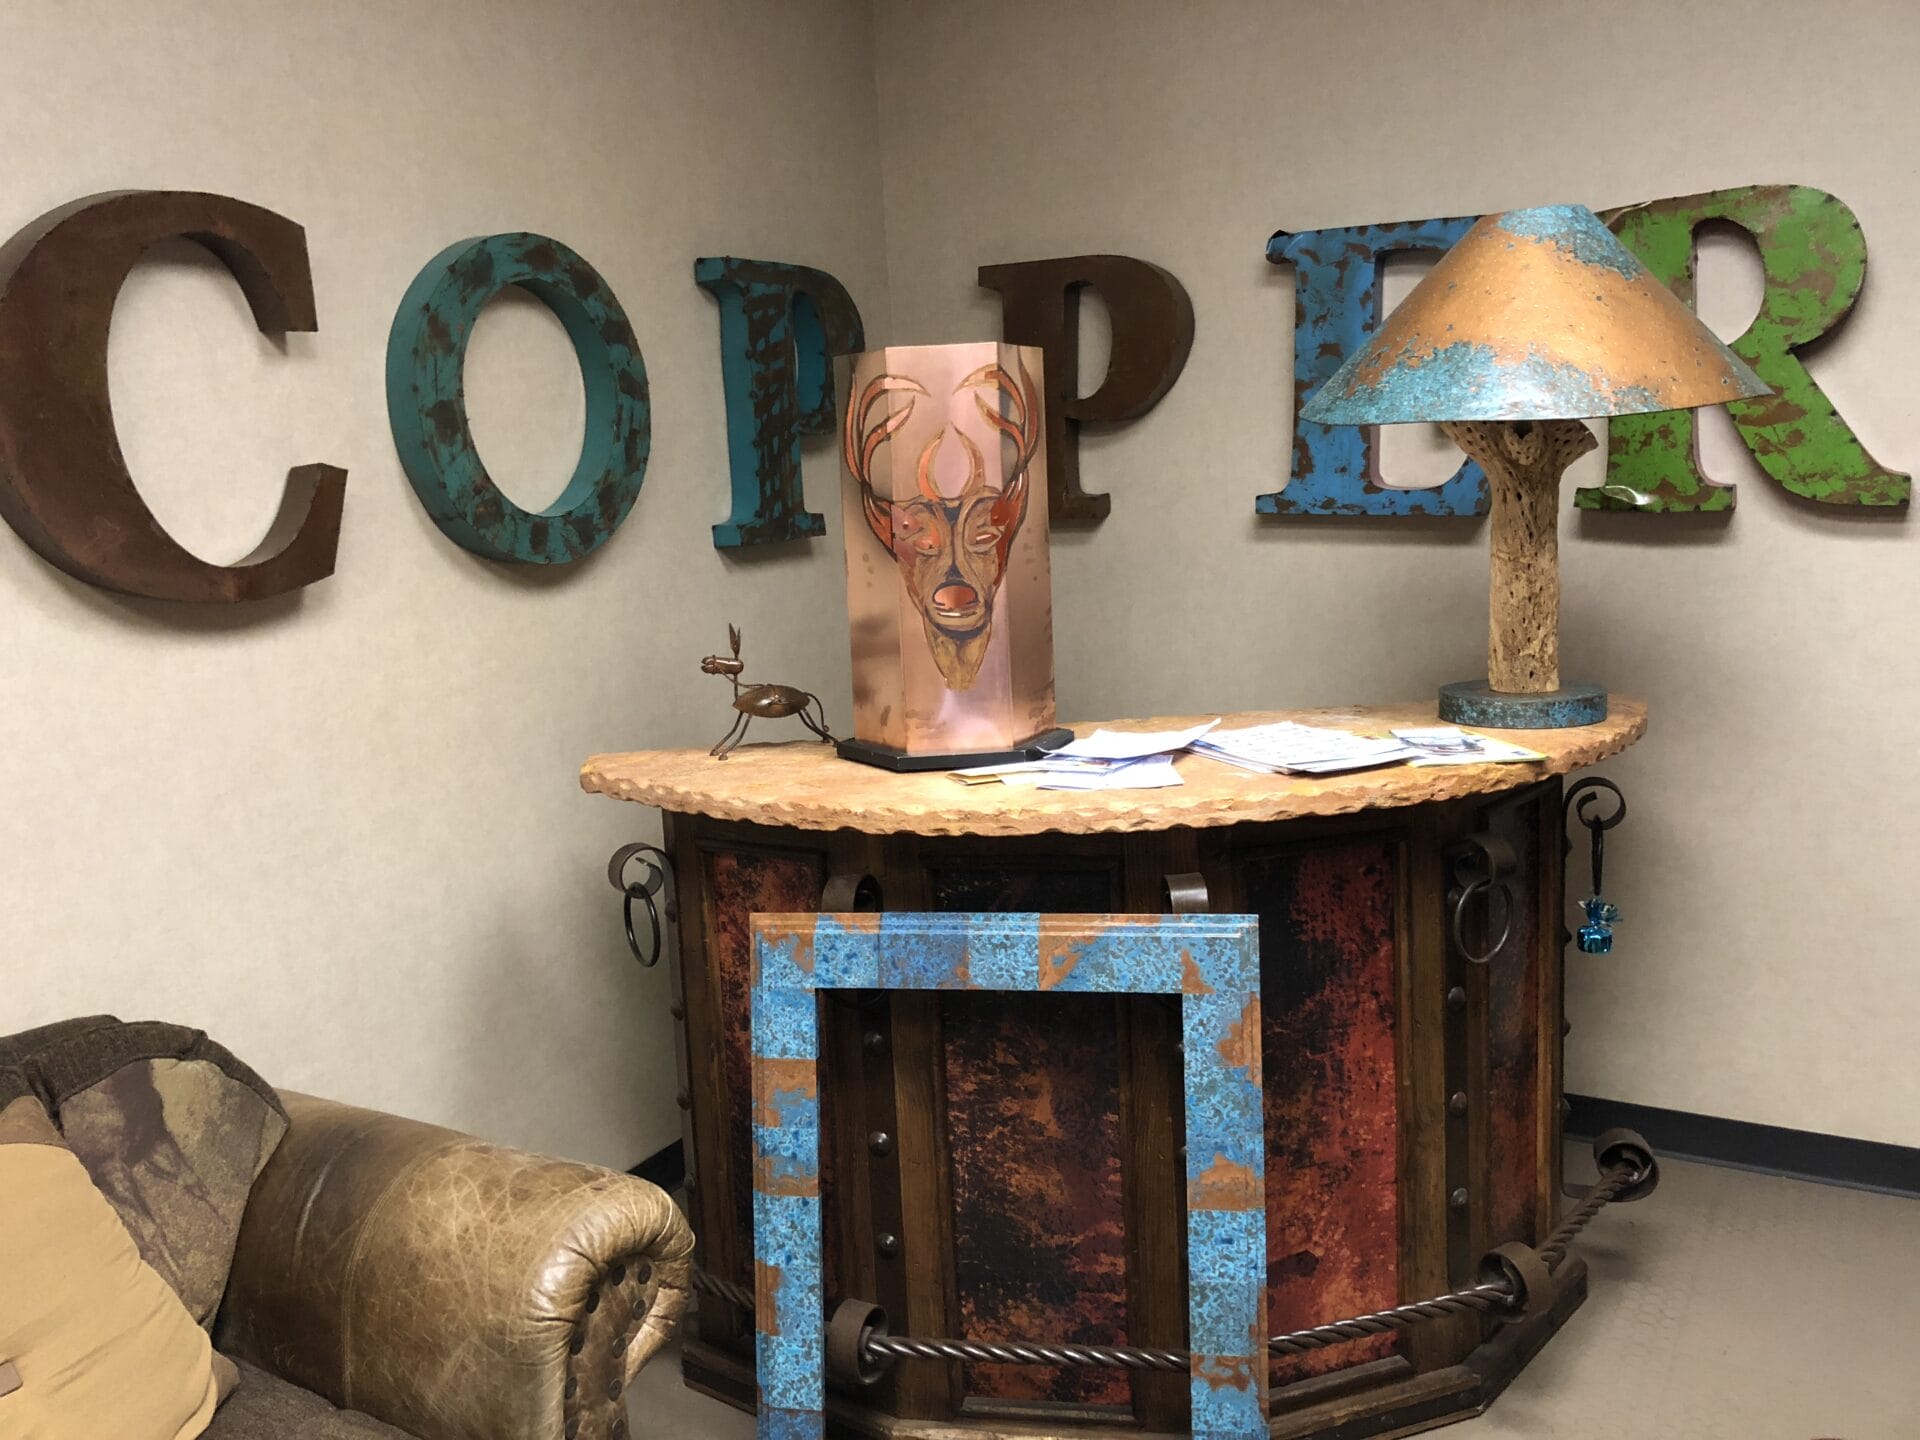 A room with a couch and chairs and a sign that says copper.